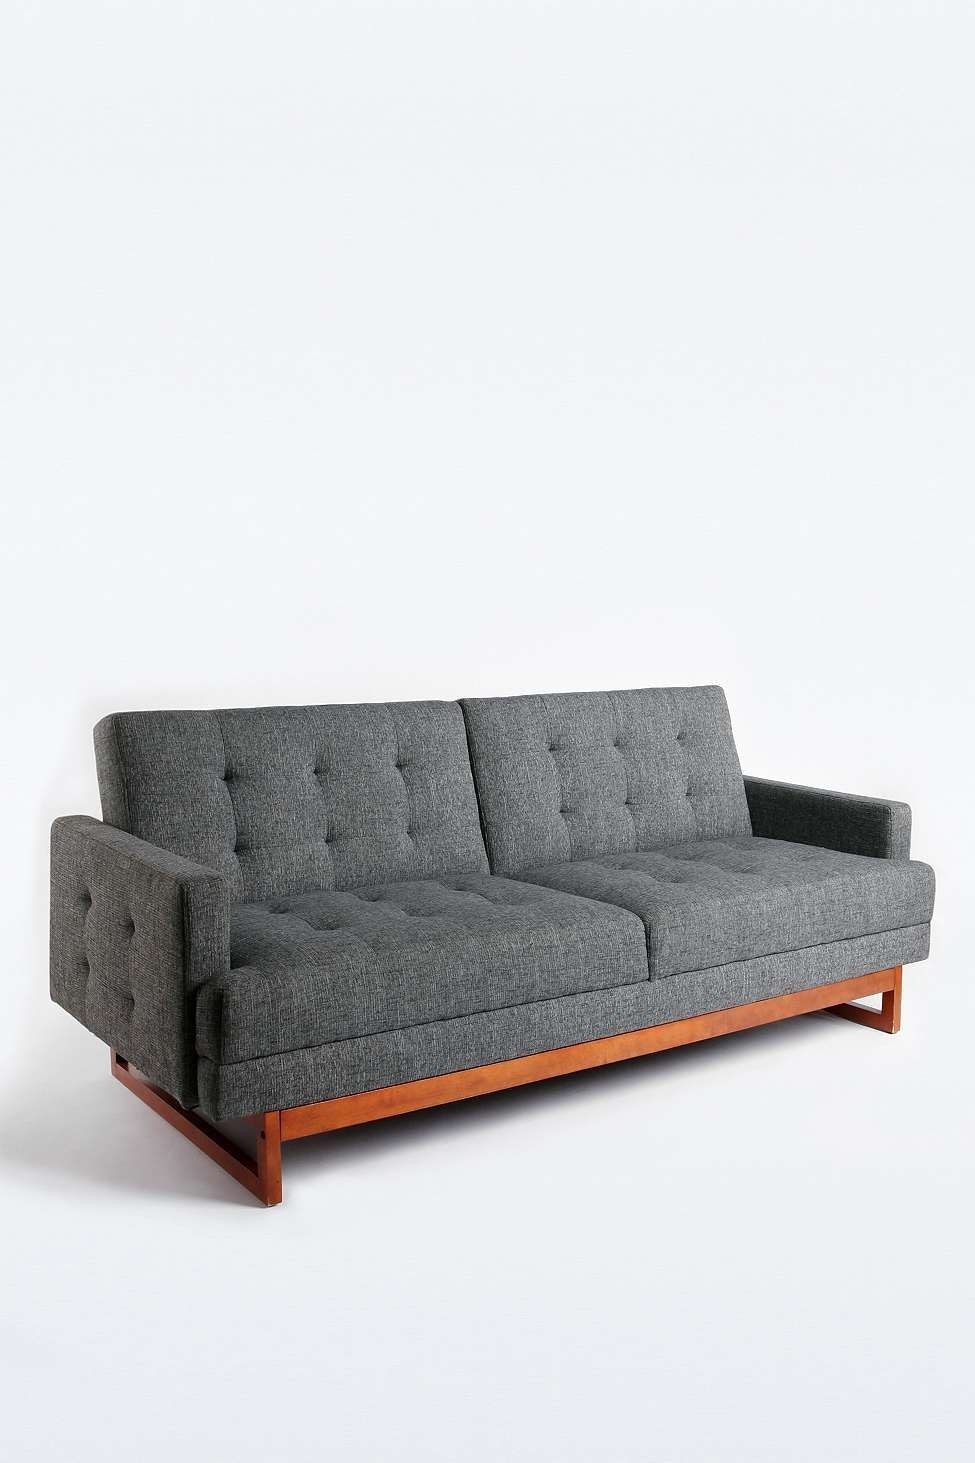 Small fold out sofa bed